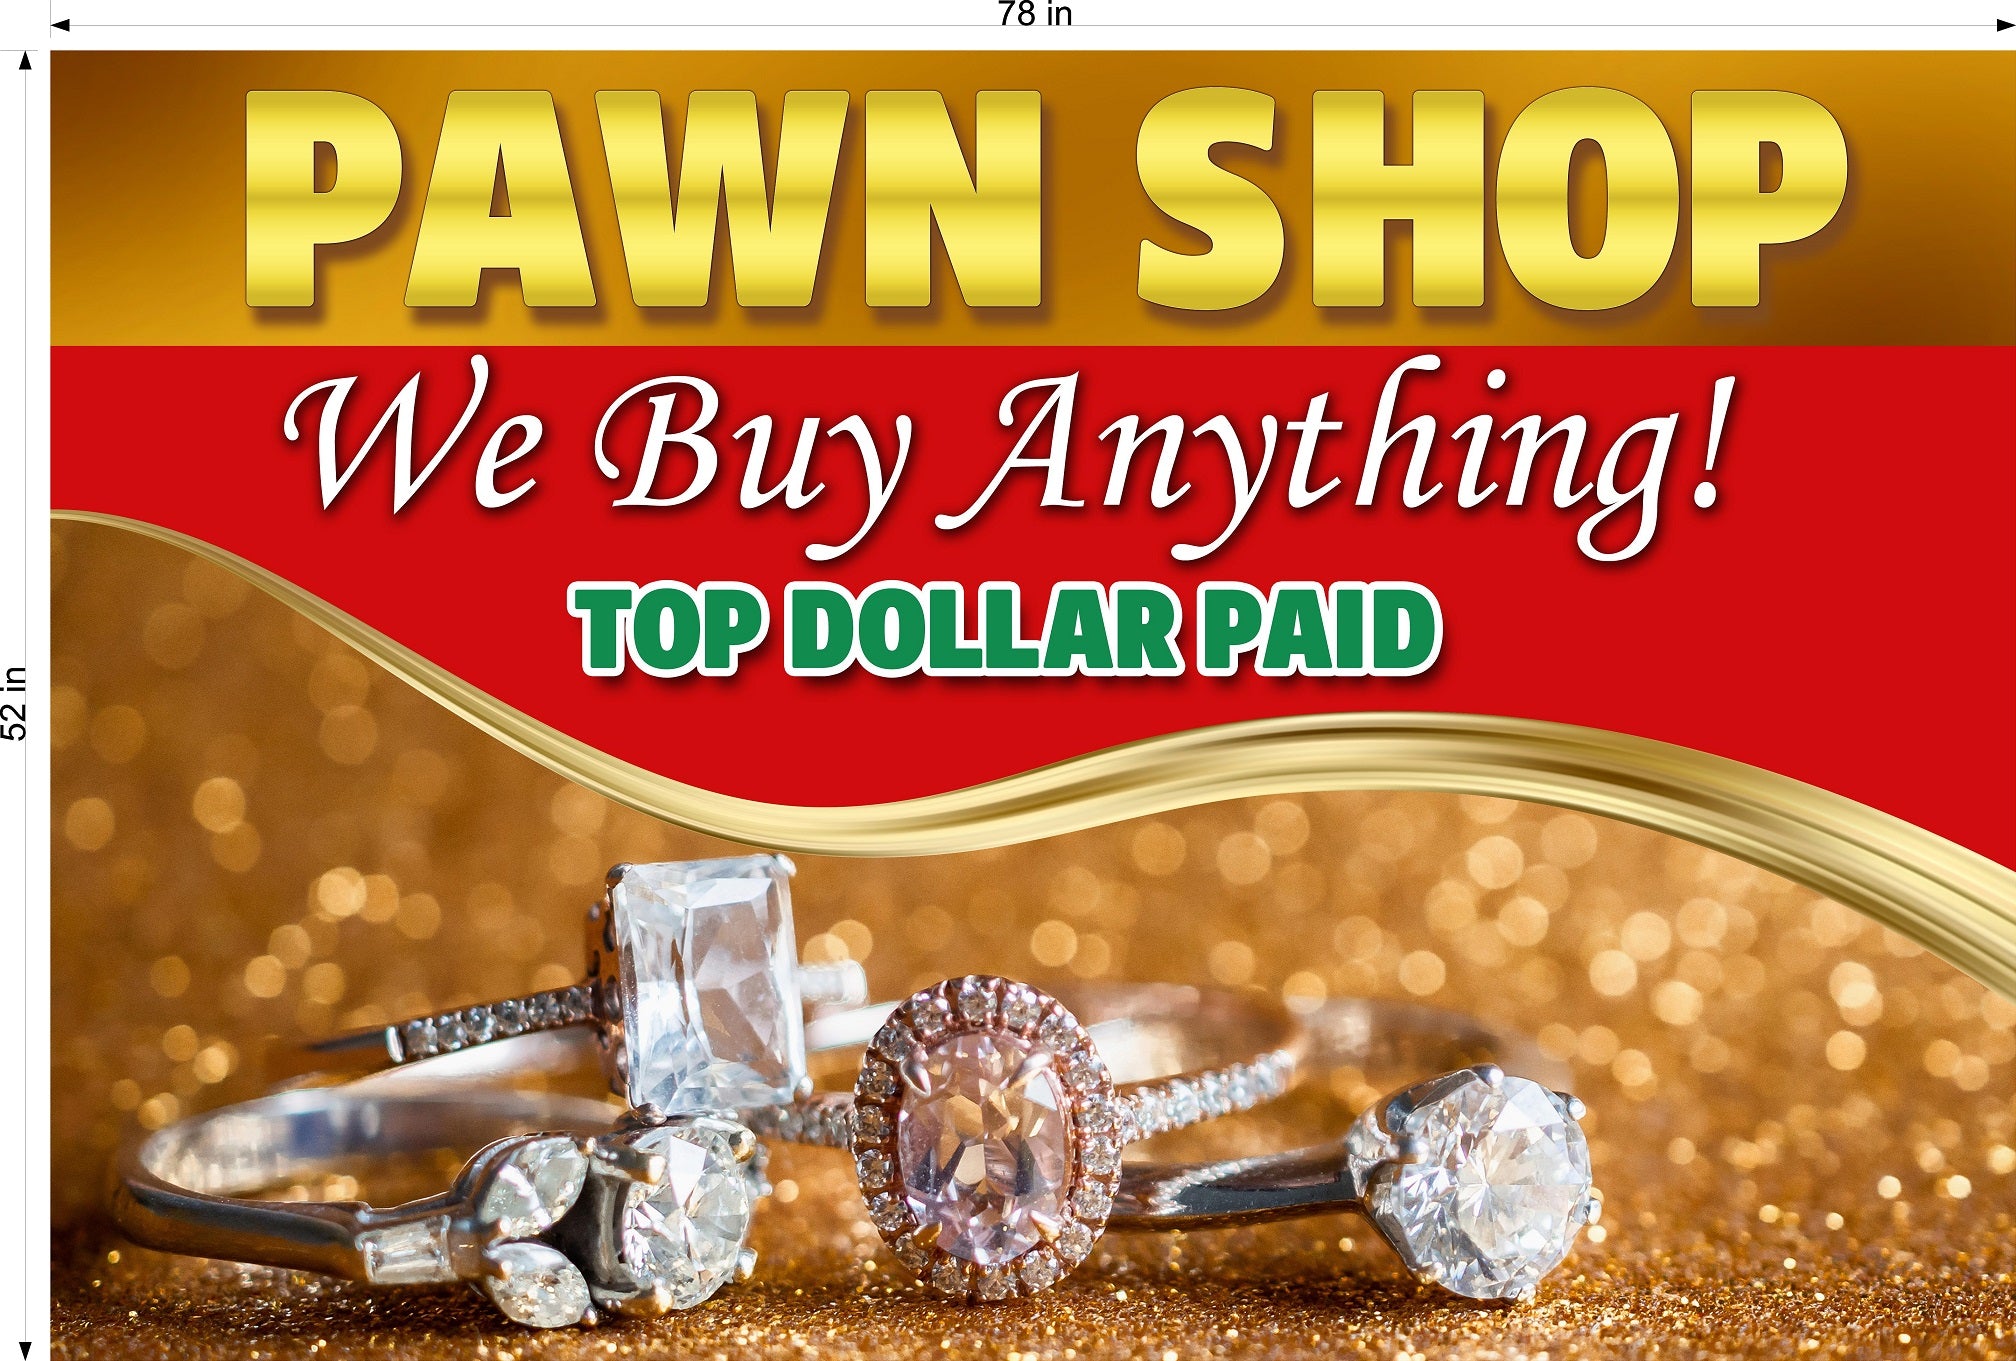 Pawn Shop 09 Photo-Realistic Paper Poster Premium Interior Inside Sign Buy Gold Silver Jewelry Wall Window Non-Laminated Horizontal